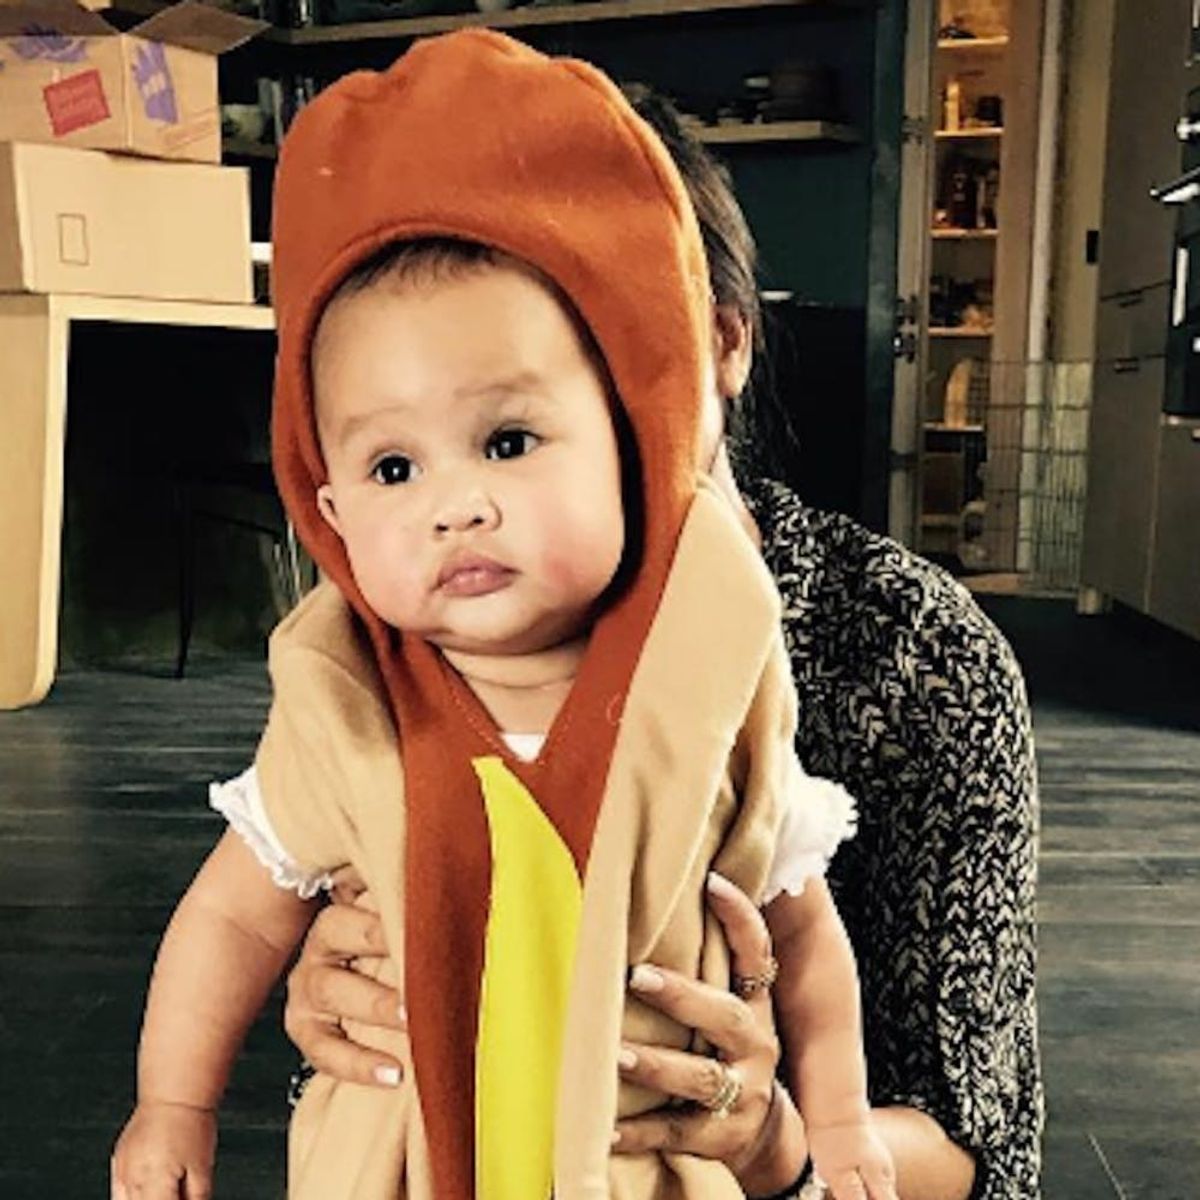 Morning Buzz! Chrissy Teigen Couldn’t Help But Dress Luna in Multiple Halloween Costumes and They Are All Too Cute to Handle + More